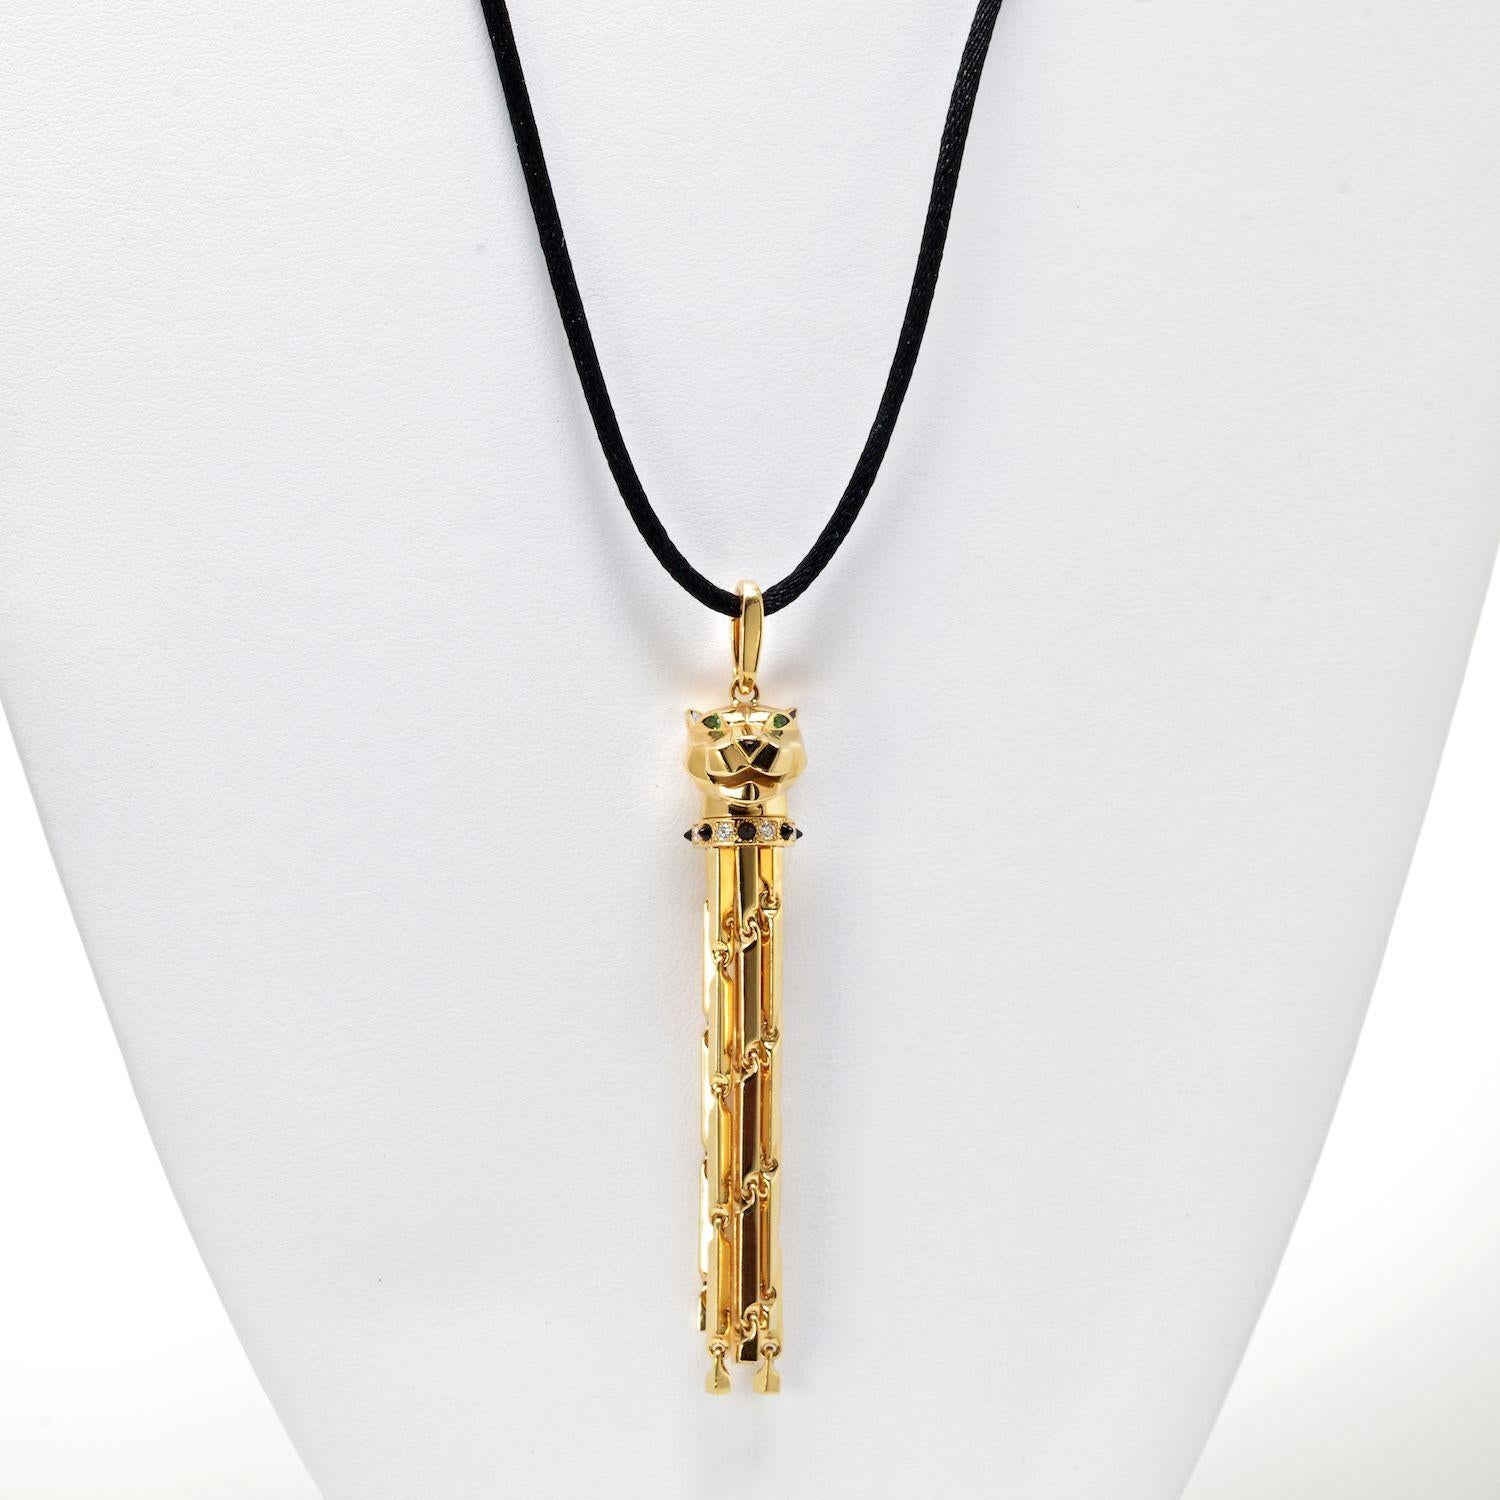 18 kt. yellow gold Panthere Sautoir necklace by Cartier. The necklace features a Panthere's head, with tsavorites set to the eye's and black onyx to the nose. The necklace has onyx and diamonds set to the collar of the Panthere, with 6 freely moving